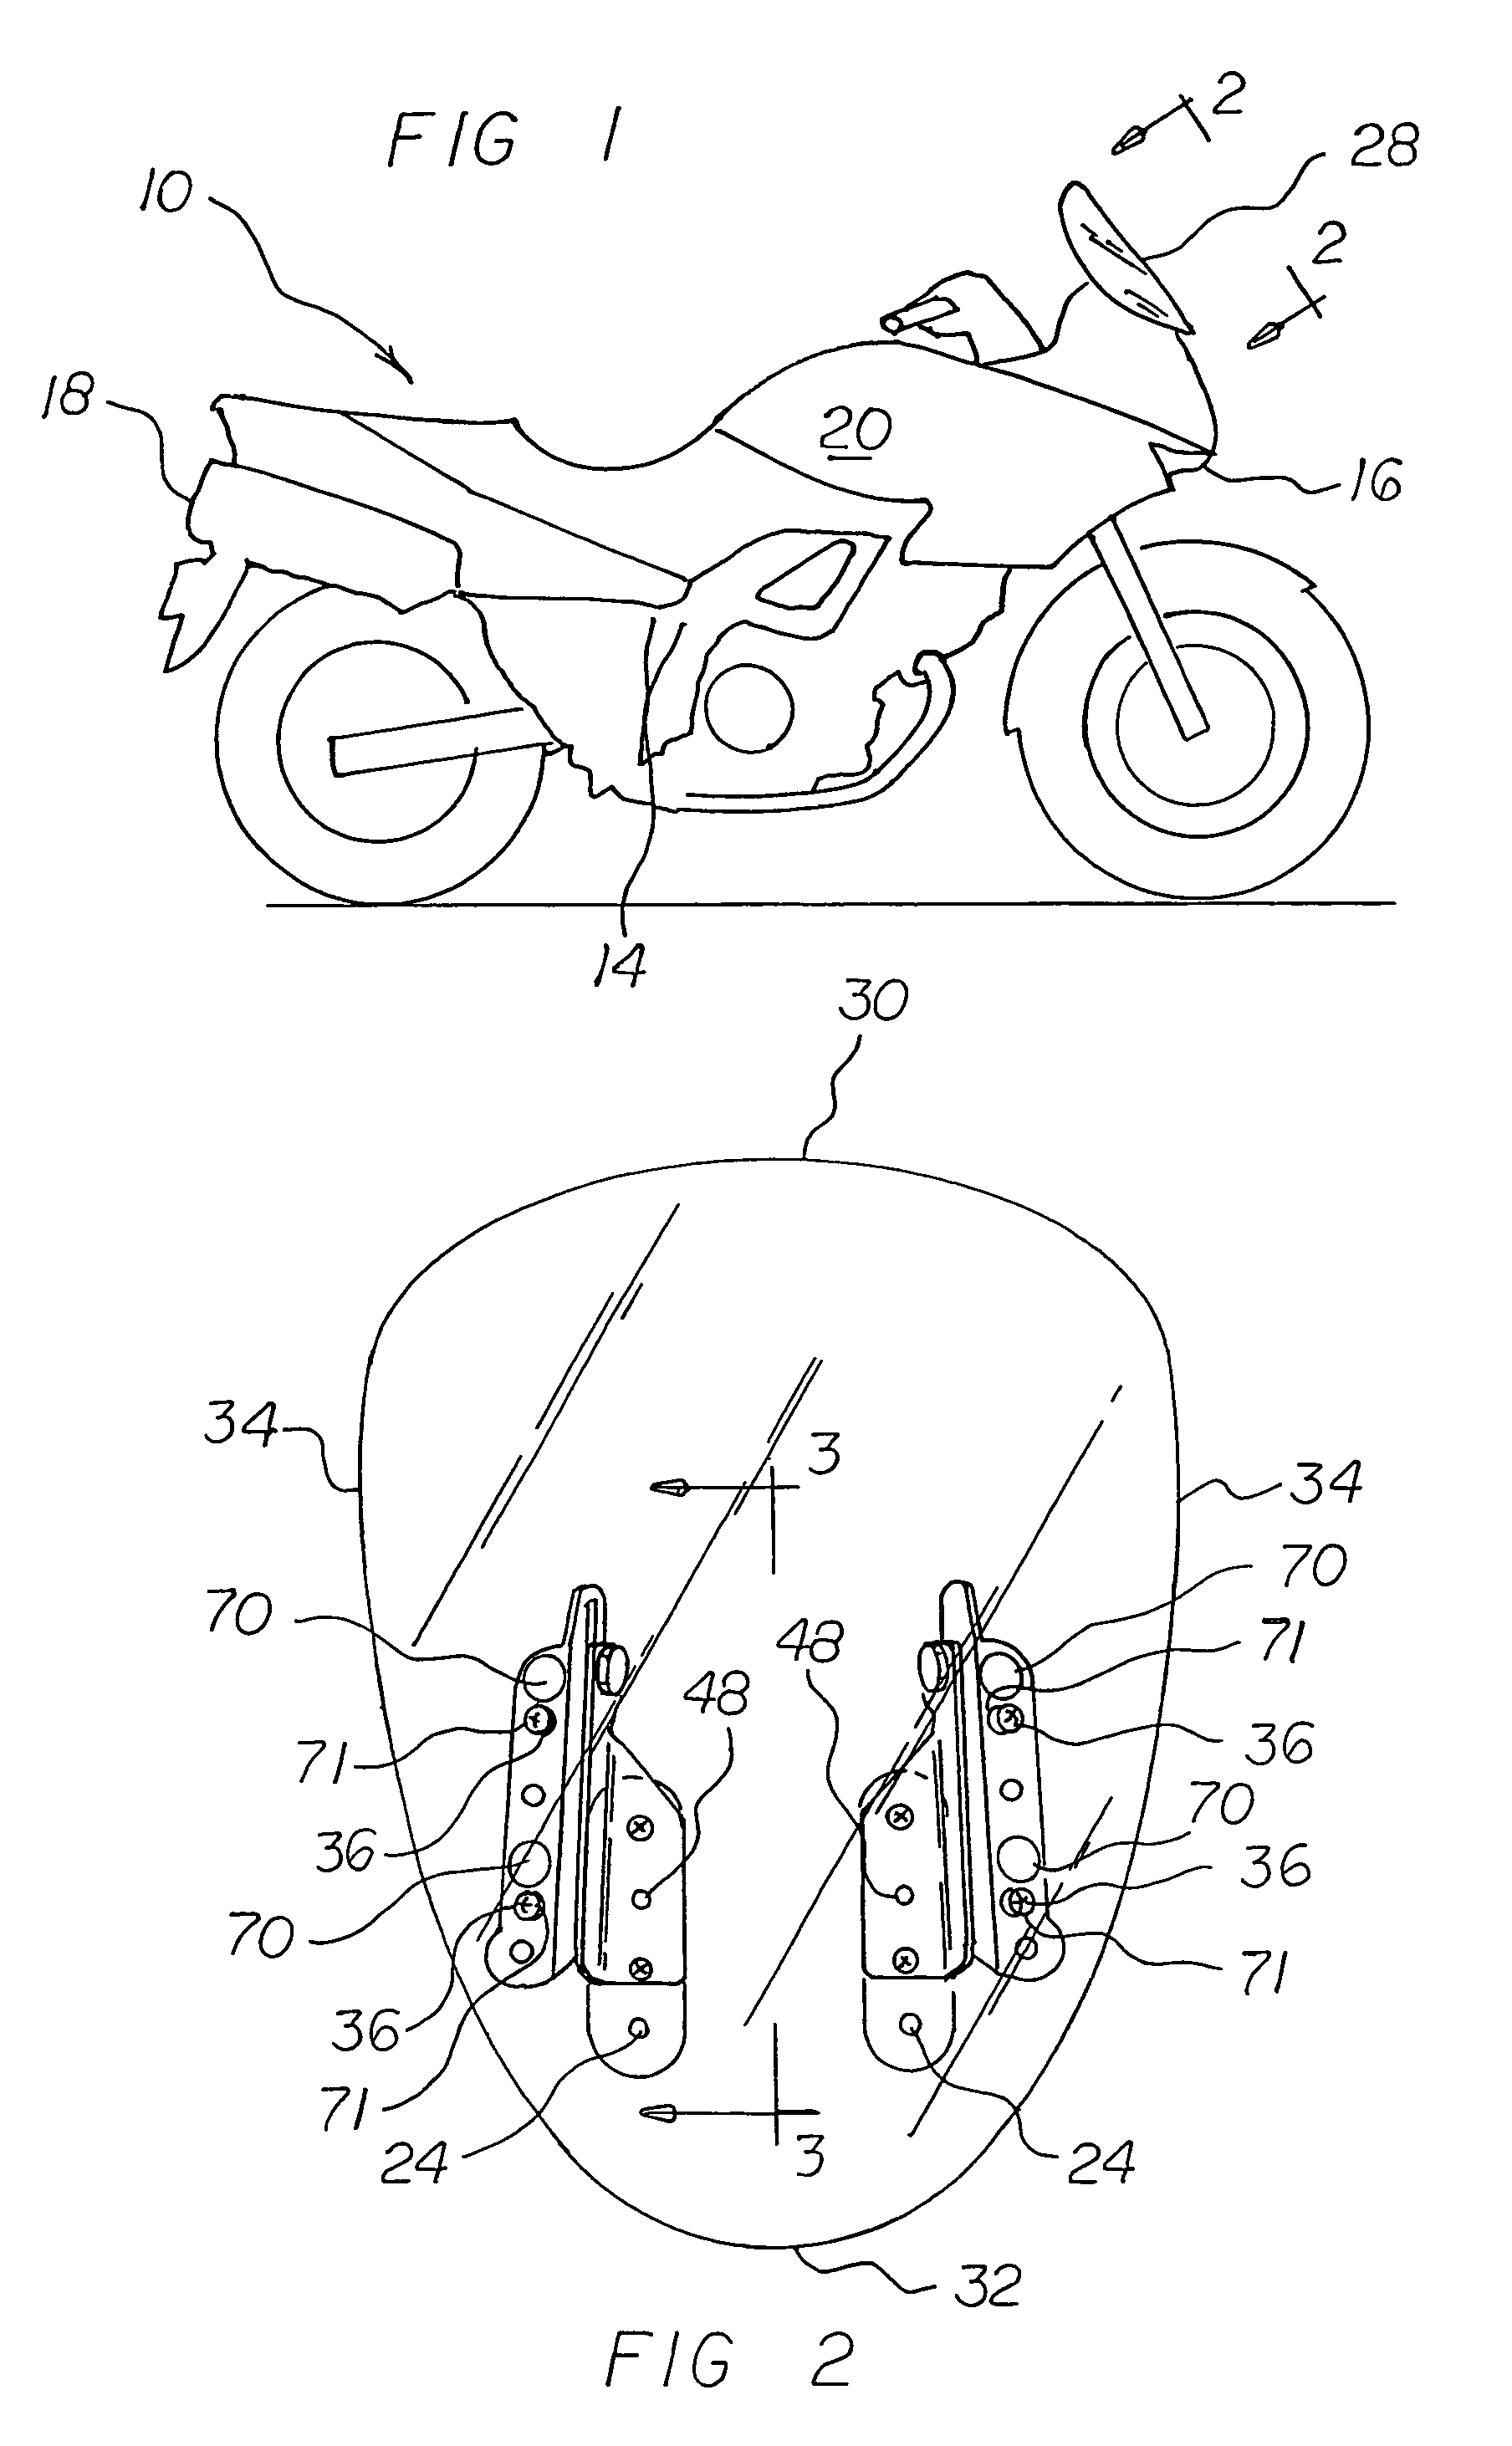 Motorcycle and windshield mount system